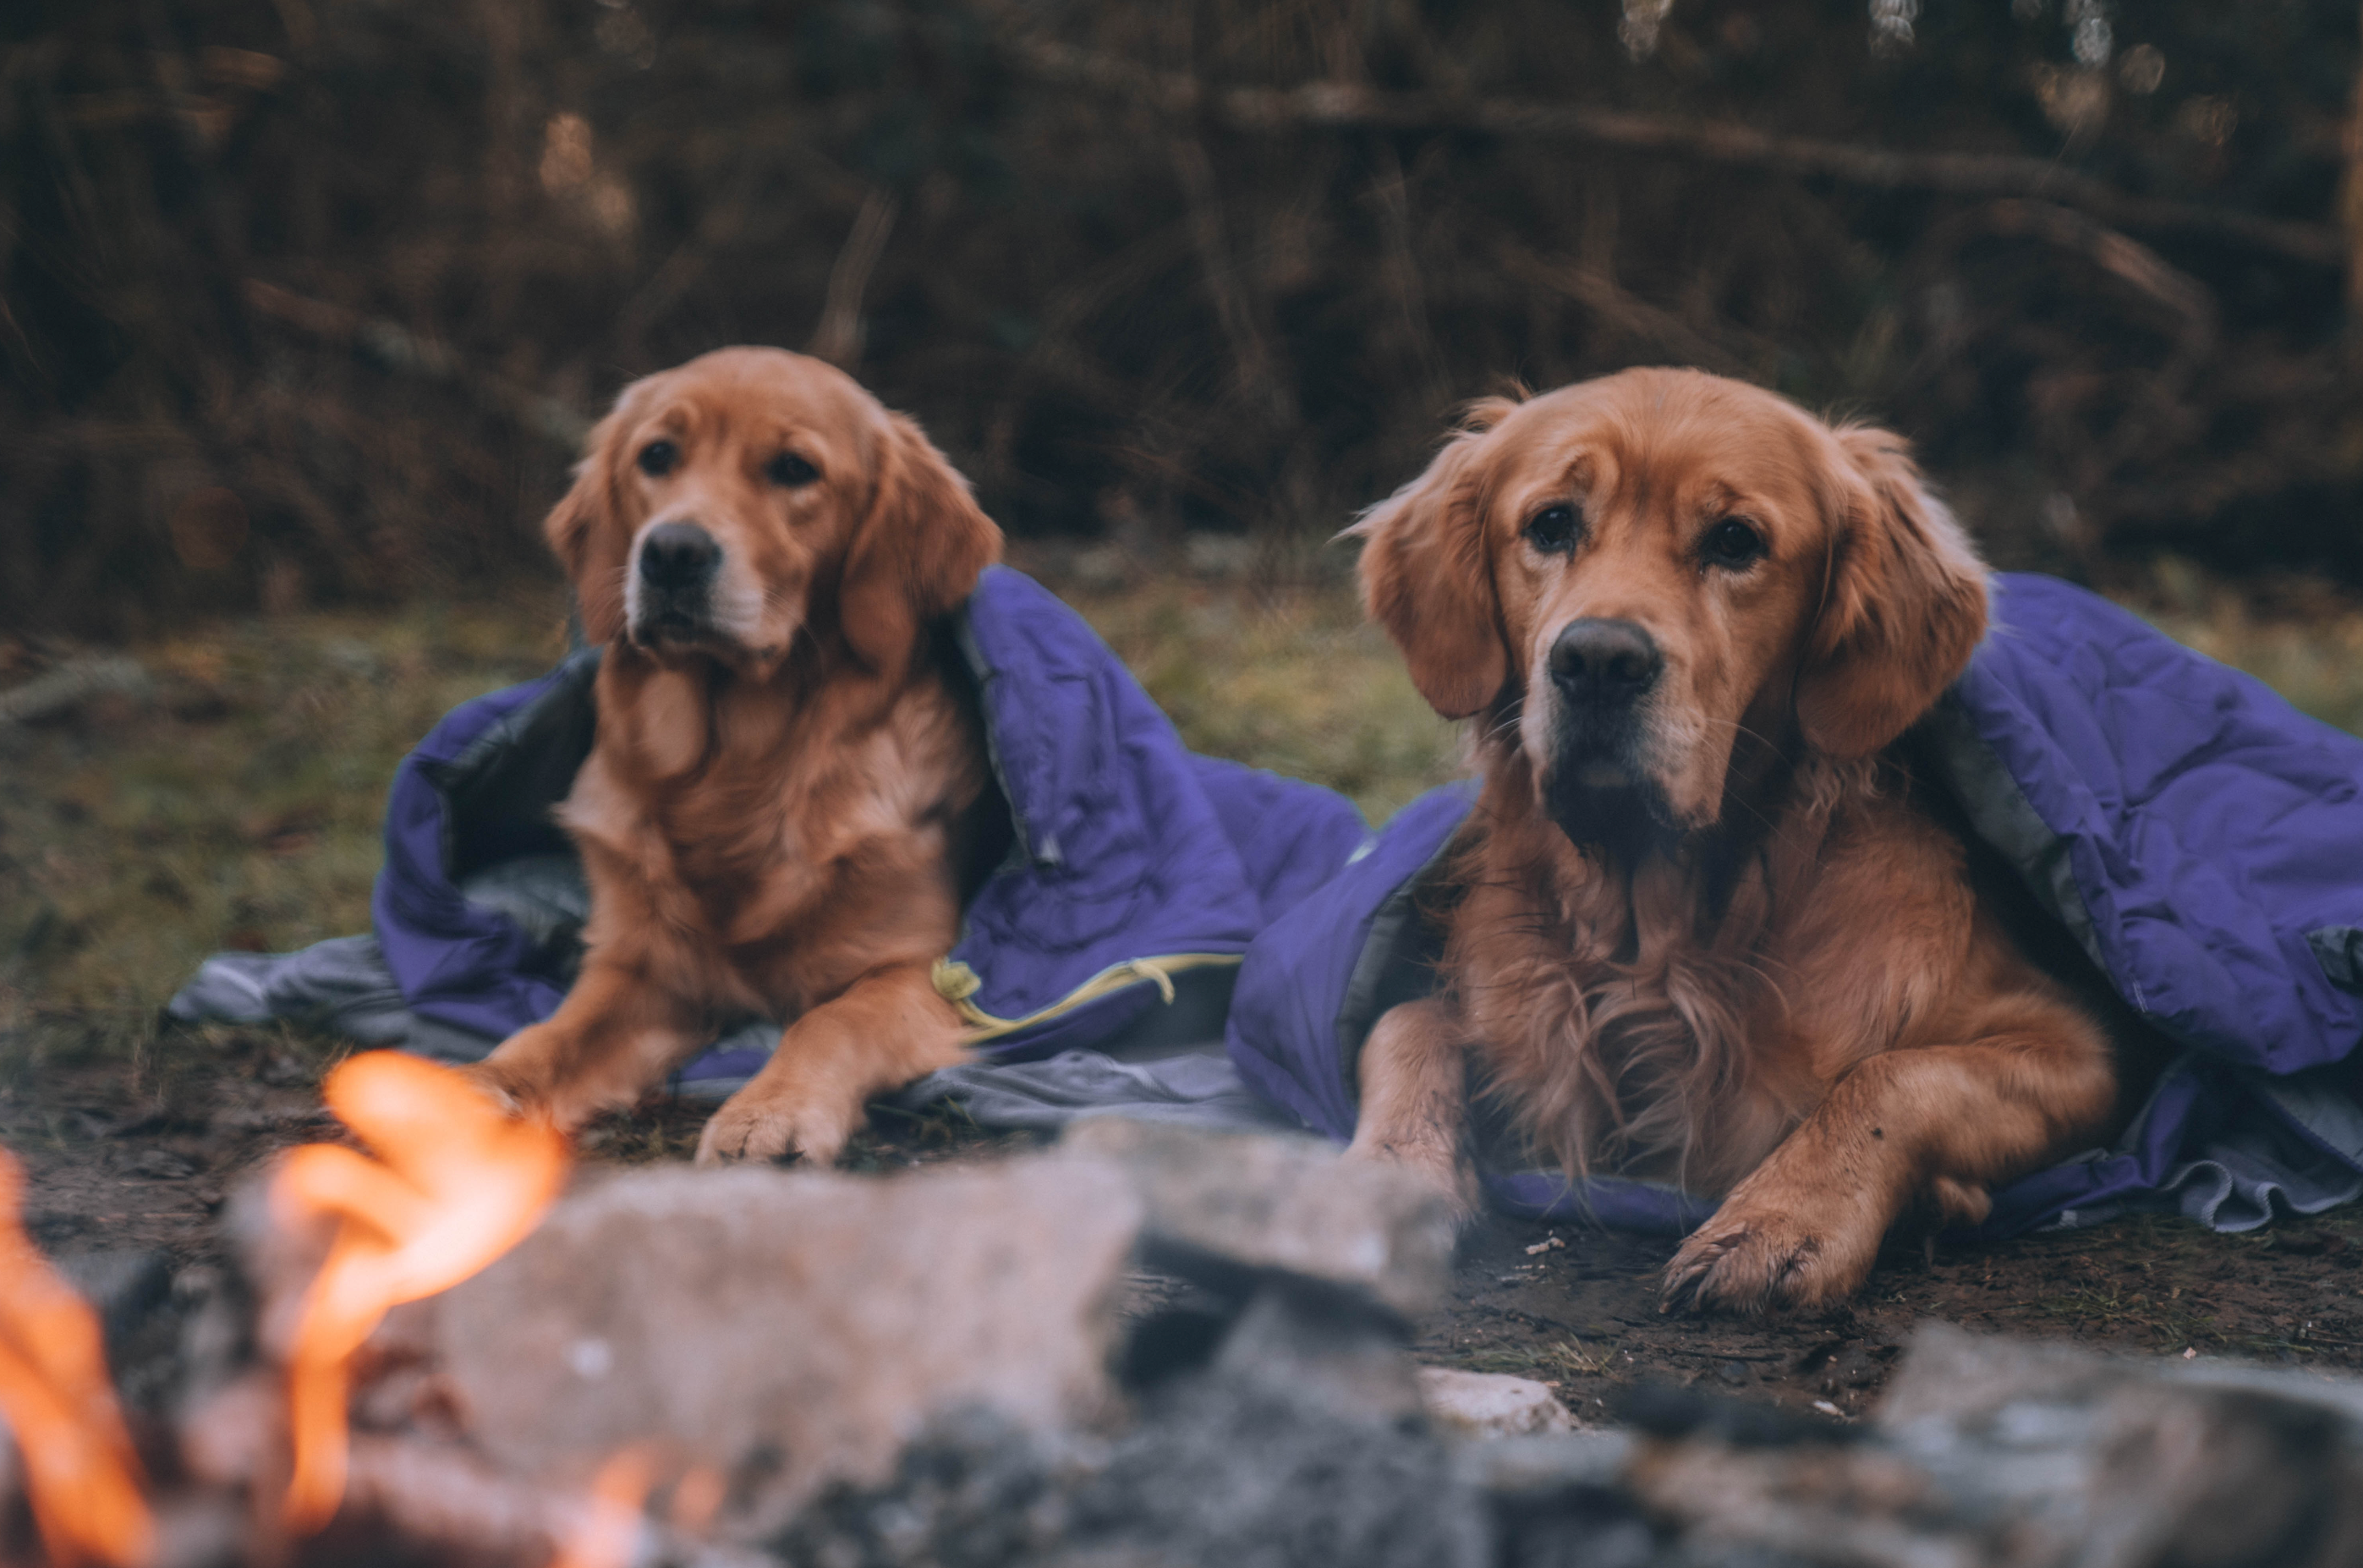 Two dogs in sleeping bags by a campfire